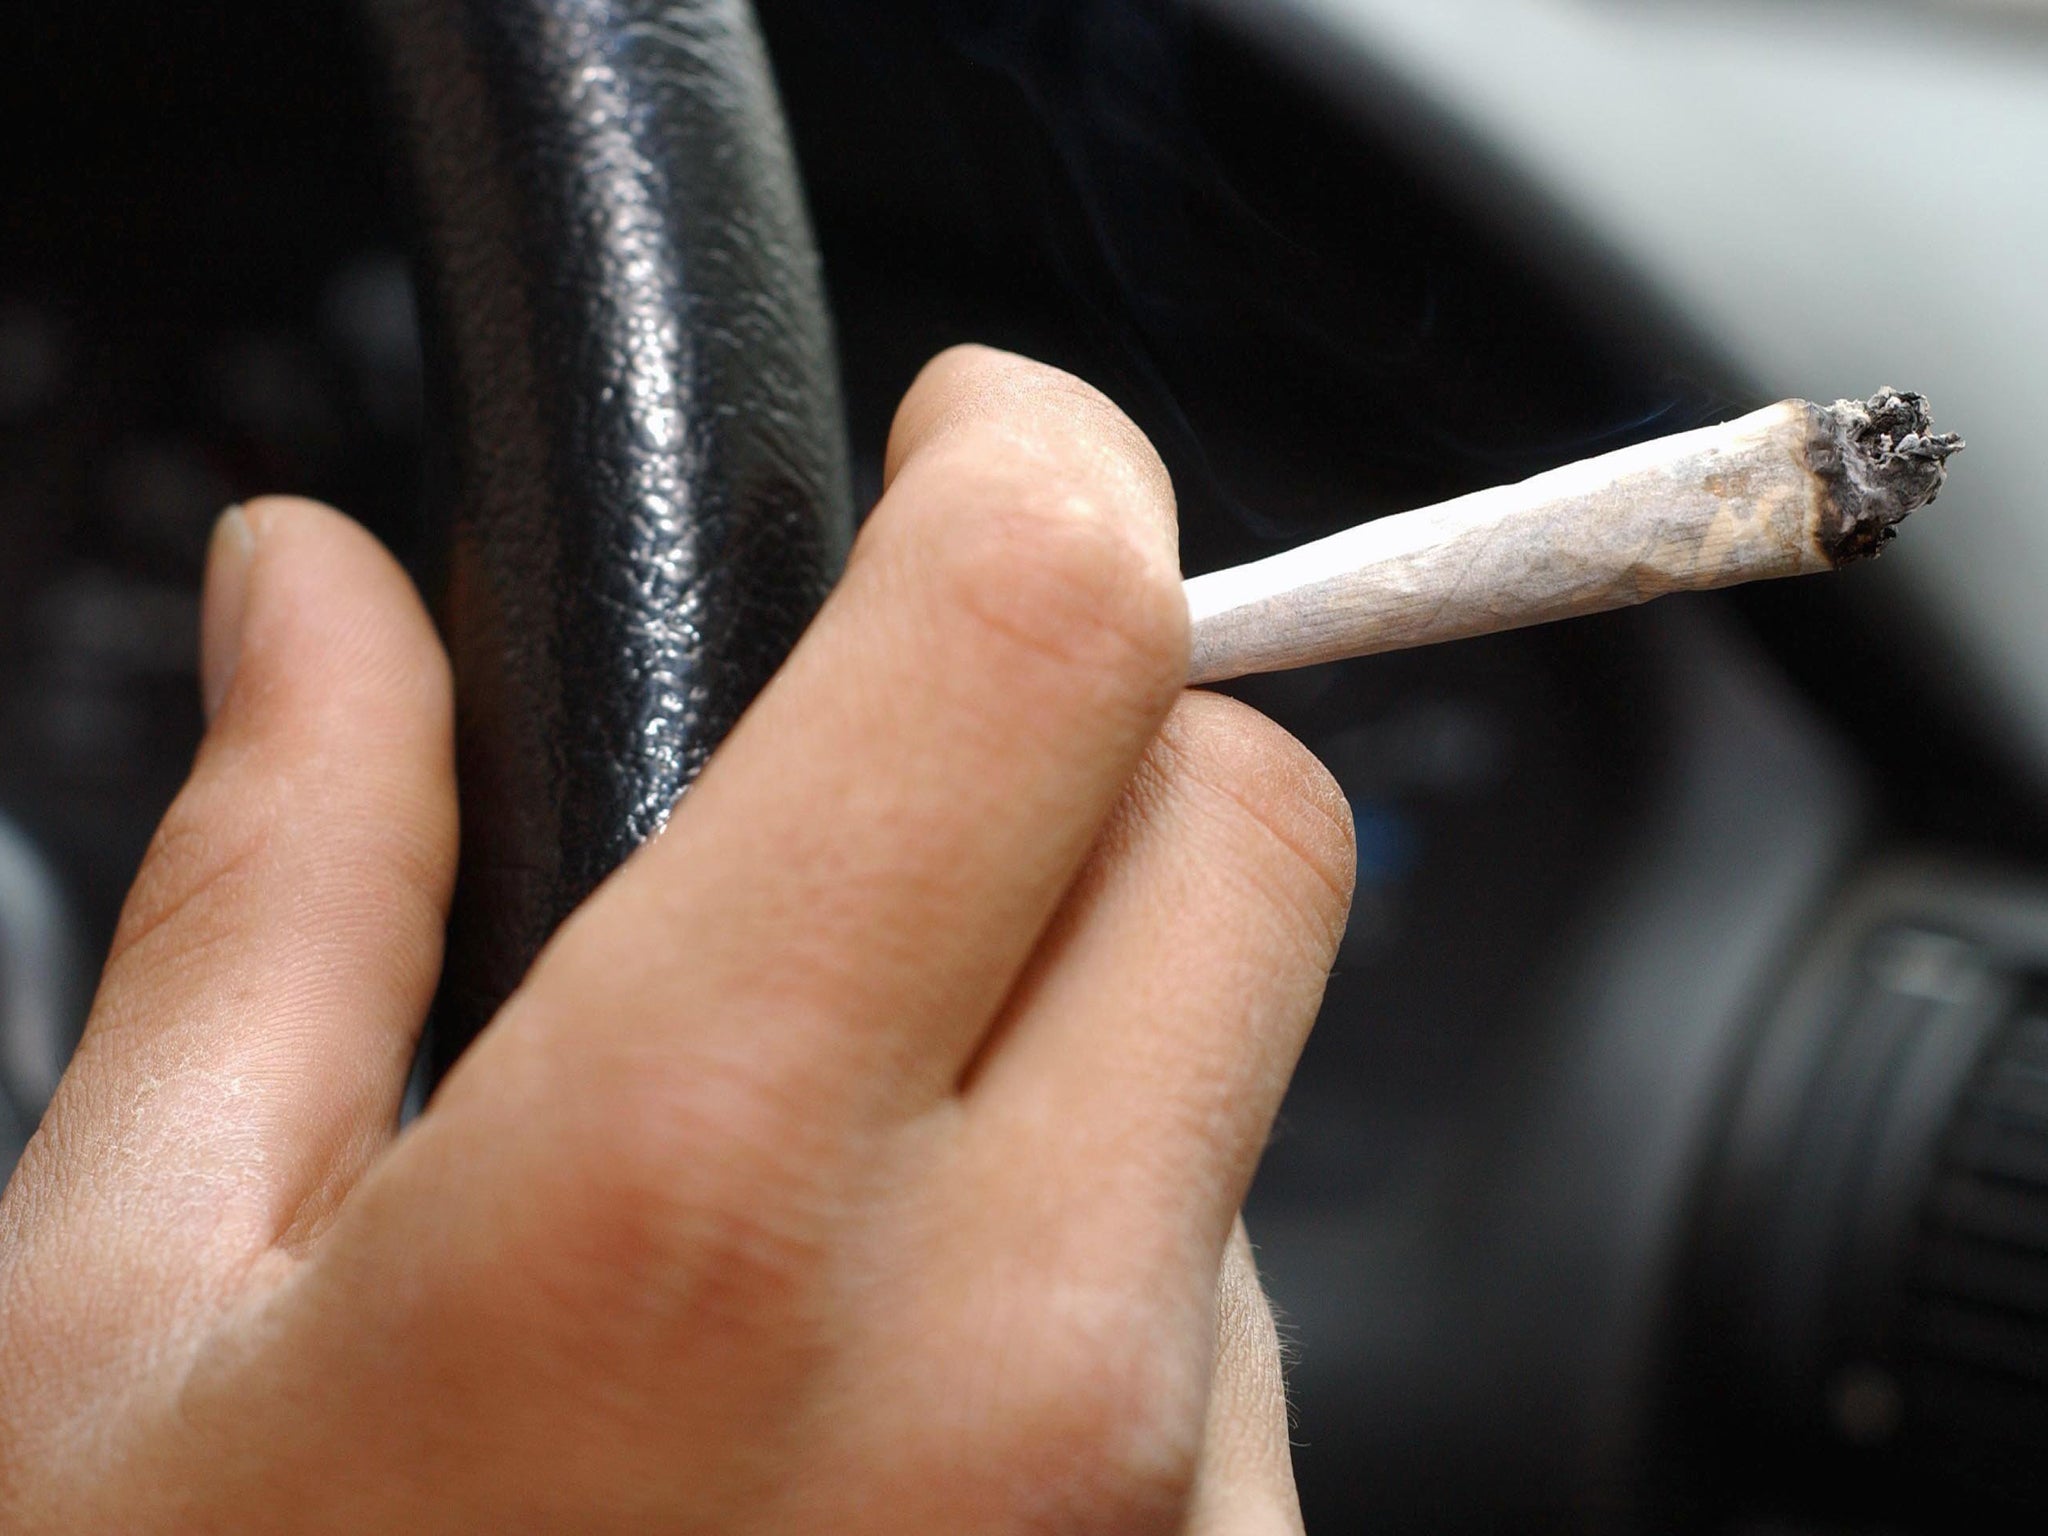 It is estimated that people driving while under the influence of drugs may account for as many as 200 deaths a year in the UK